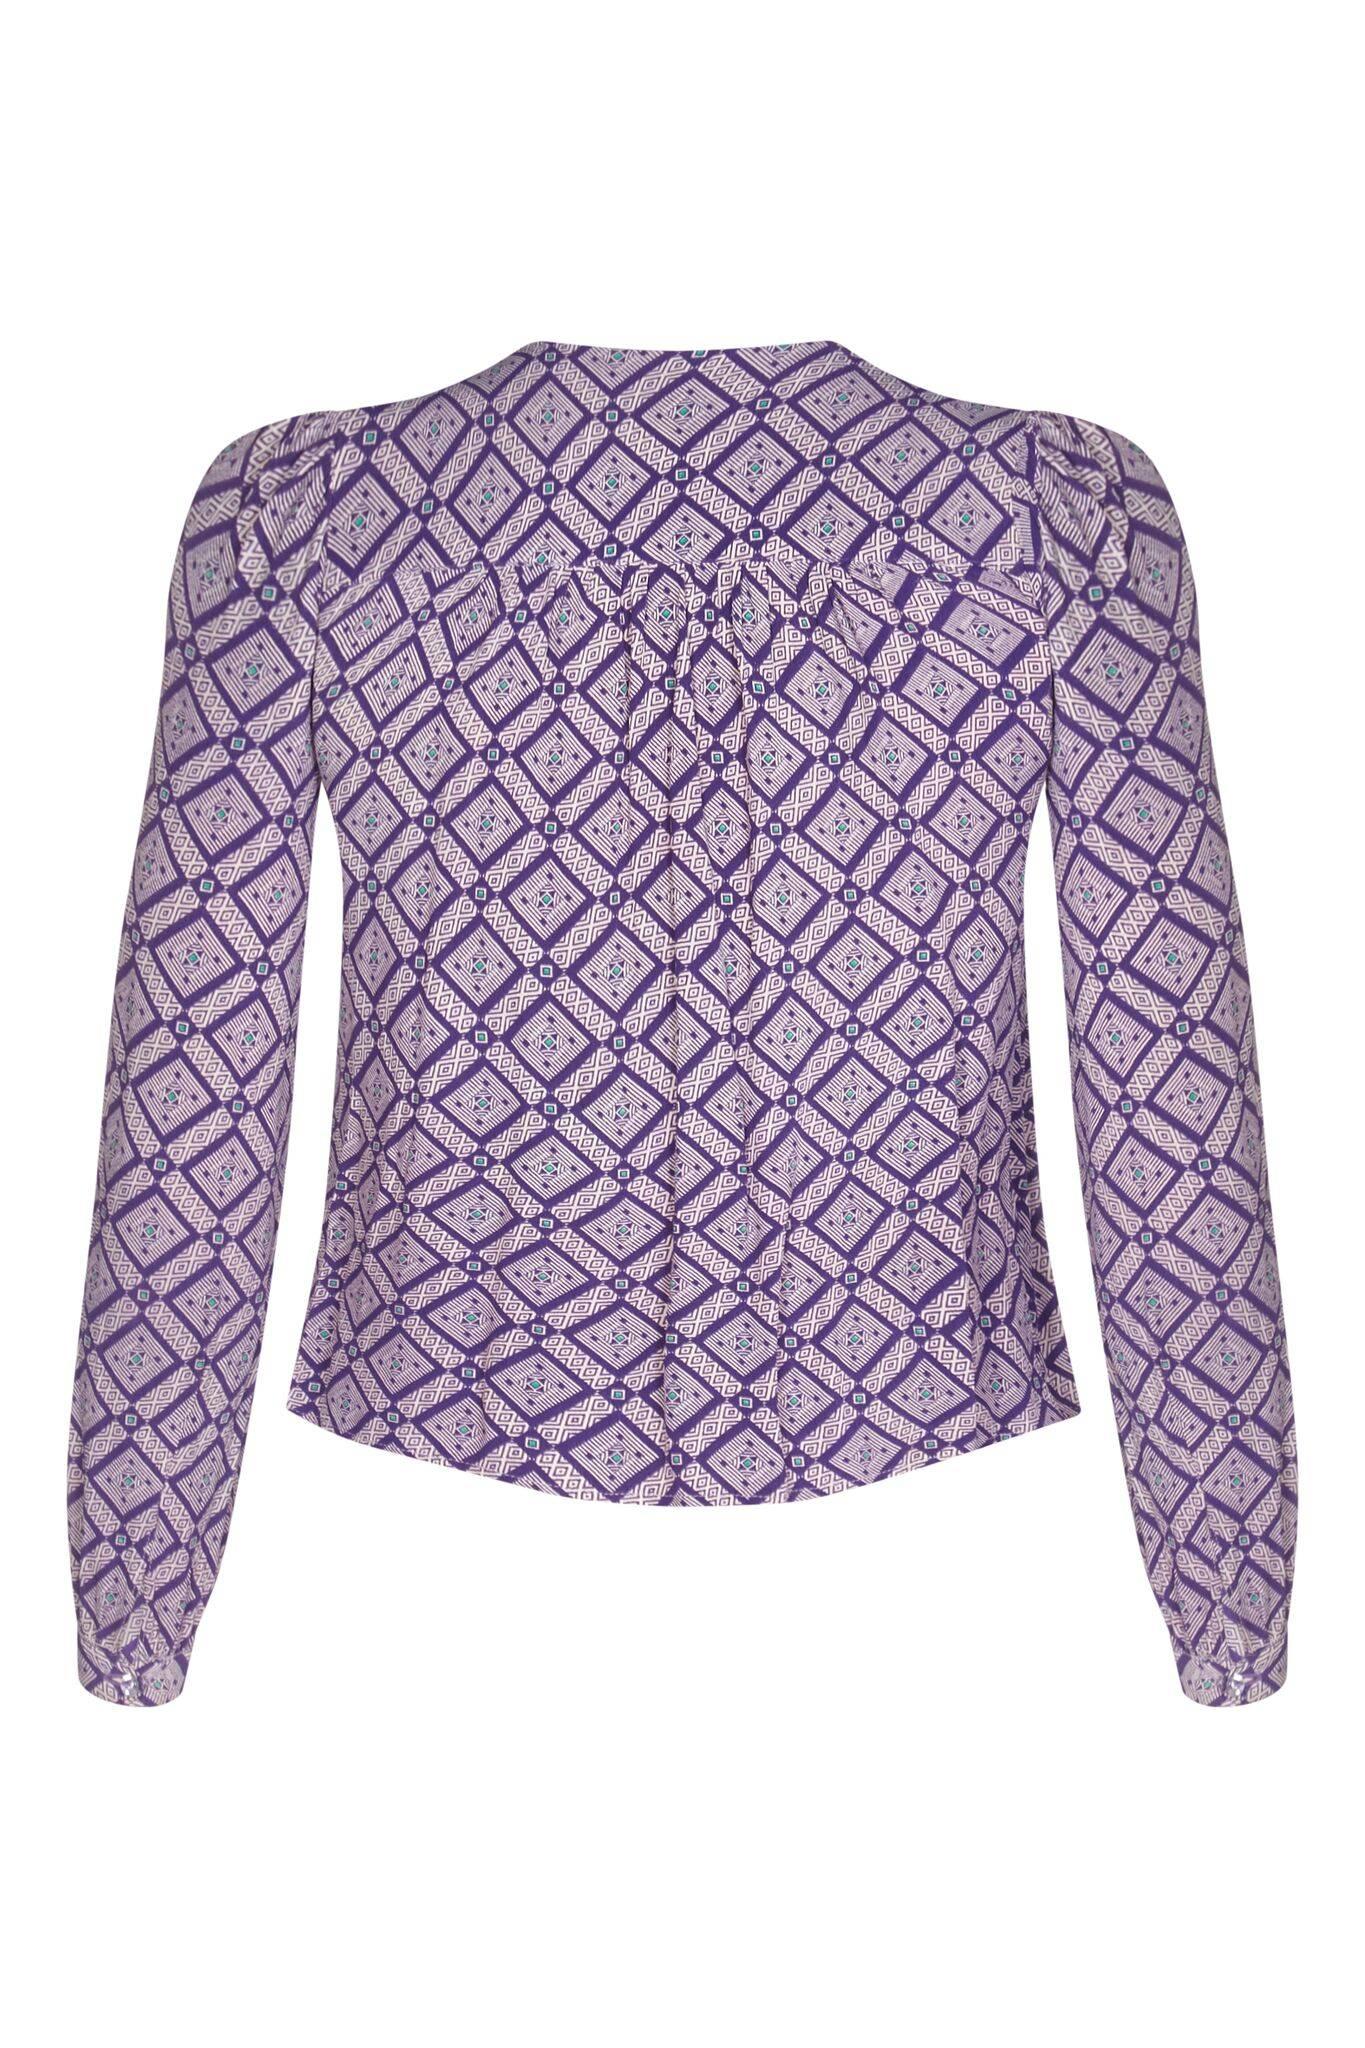 This enigmatic 1970s purple geometric blouse with pussy bow collar detail is a piece by celebrated British designer Jeff Banks, as part of his successful 1960s and 1970s boutique brand Clobber. This rayon piece is both smart and feminine, with